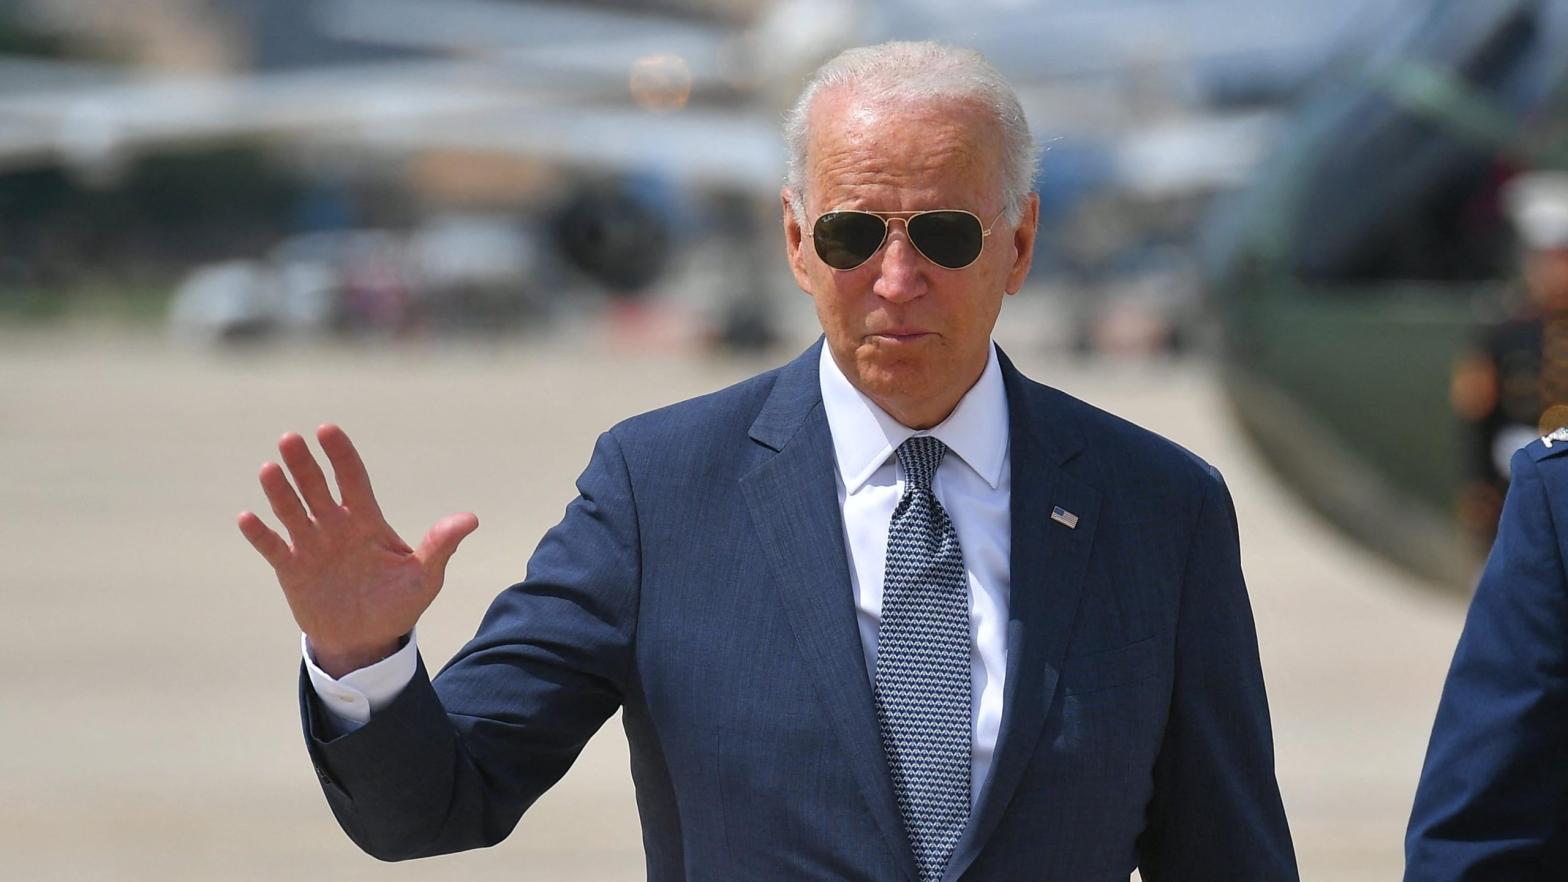 Joe Biden is seen here boarding Air Force One at Andrews Air Force Base in Maryland on July 9, 2021, on his way to Wilmington, Delaware. (Photo: Mandel Ngan/AFP, Getty Images)